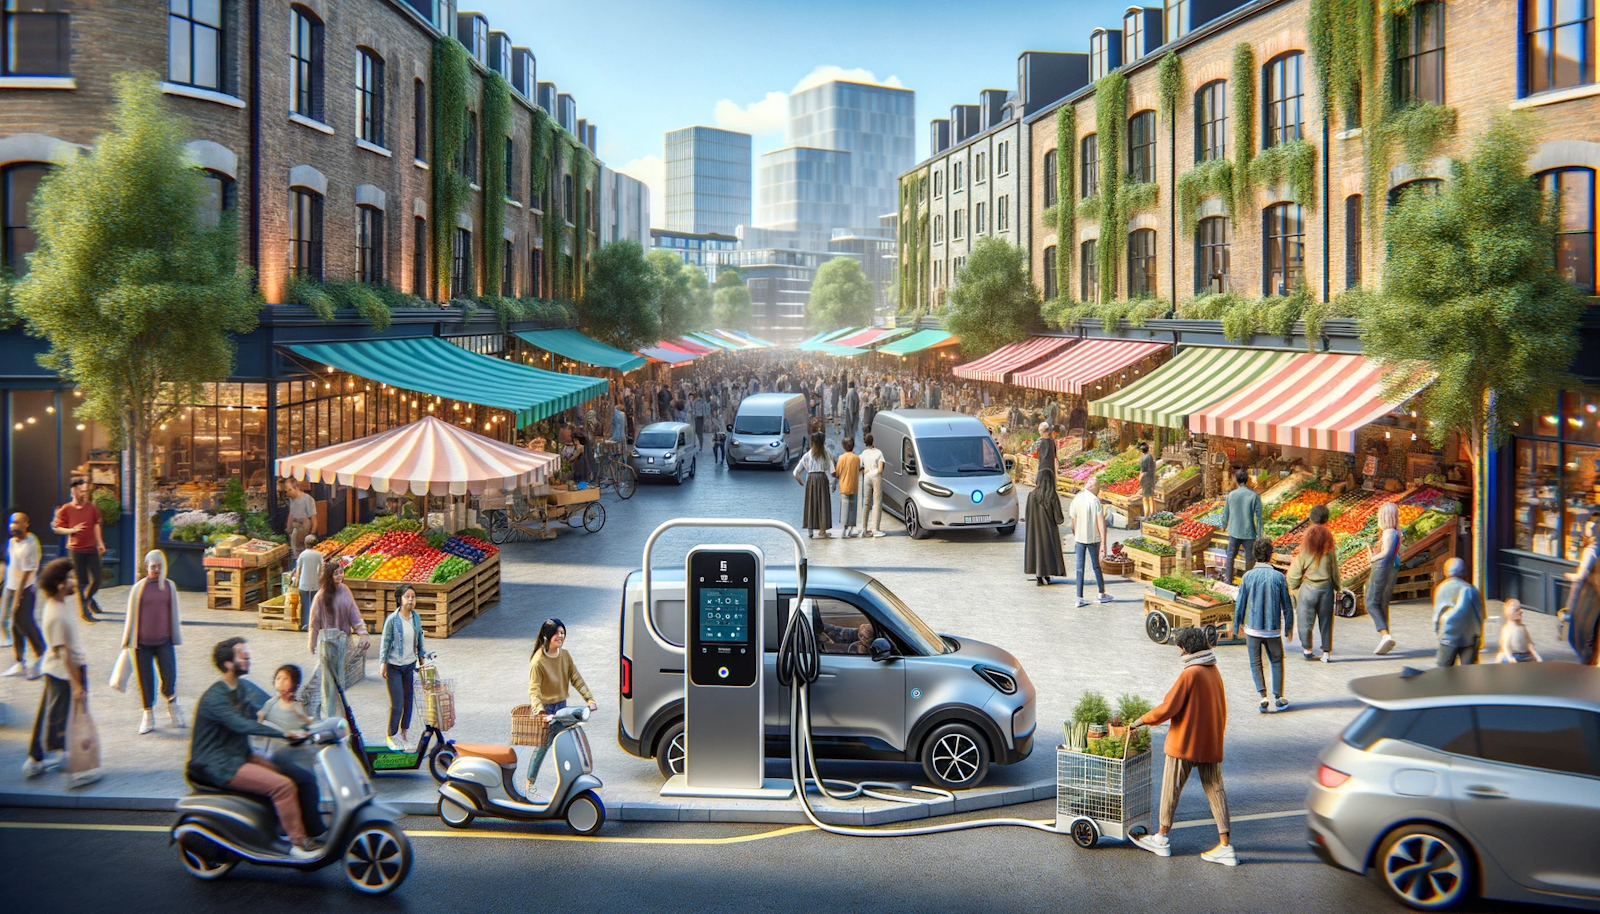 Outdoor market scene with an electric vehicle (EV) charging station, bustling with shoppers and vendors near colorful storefronts, showcasing sustainable urban community life.